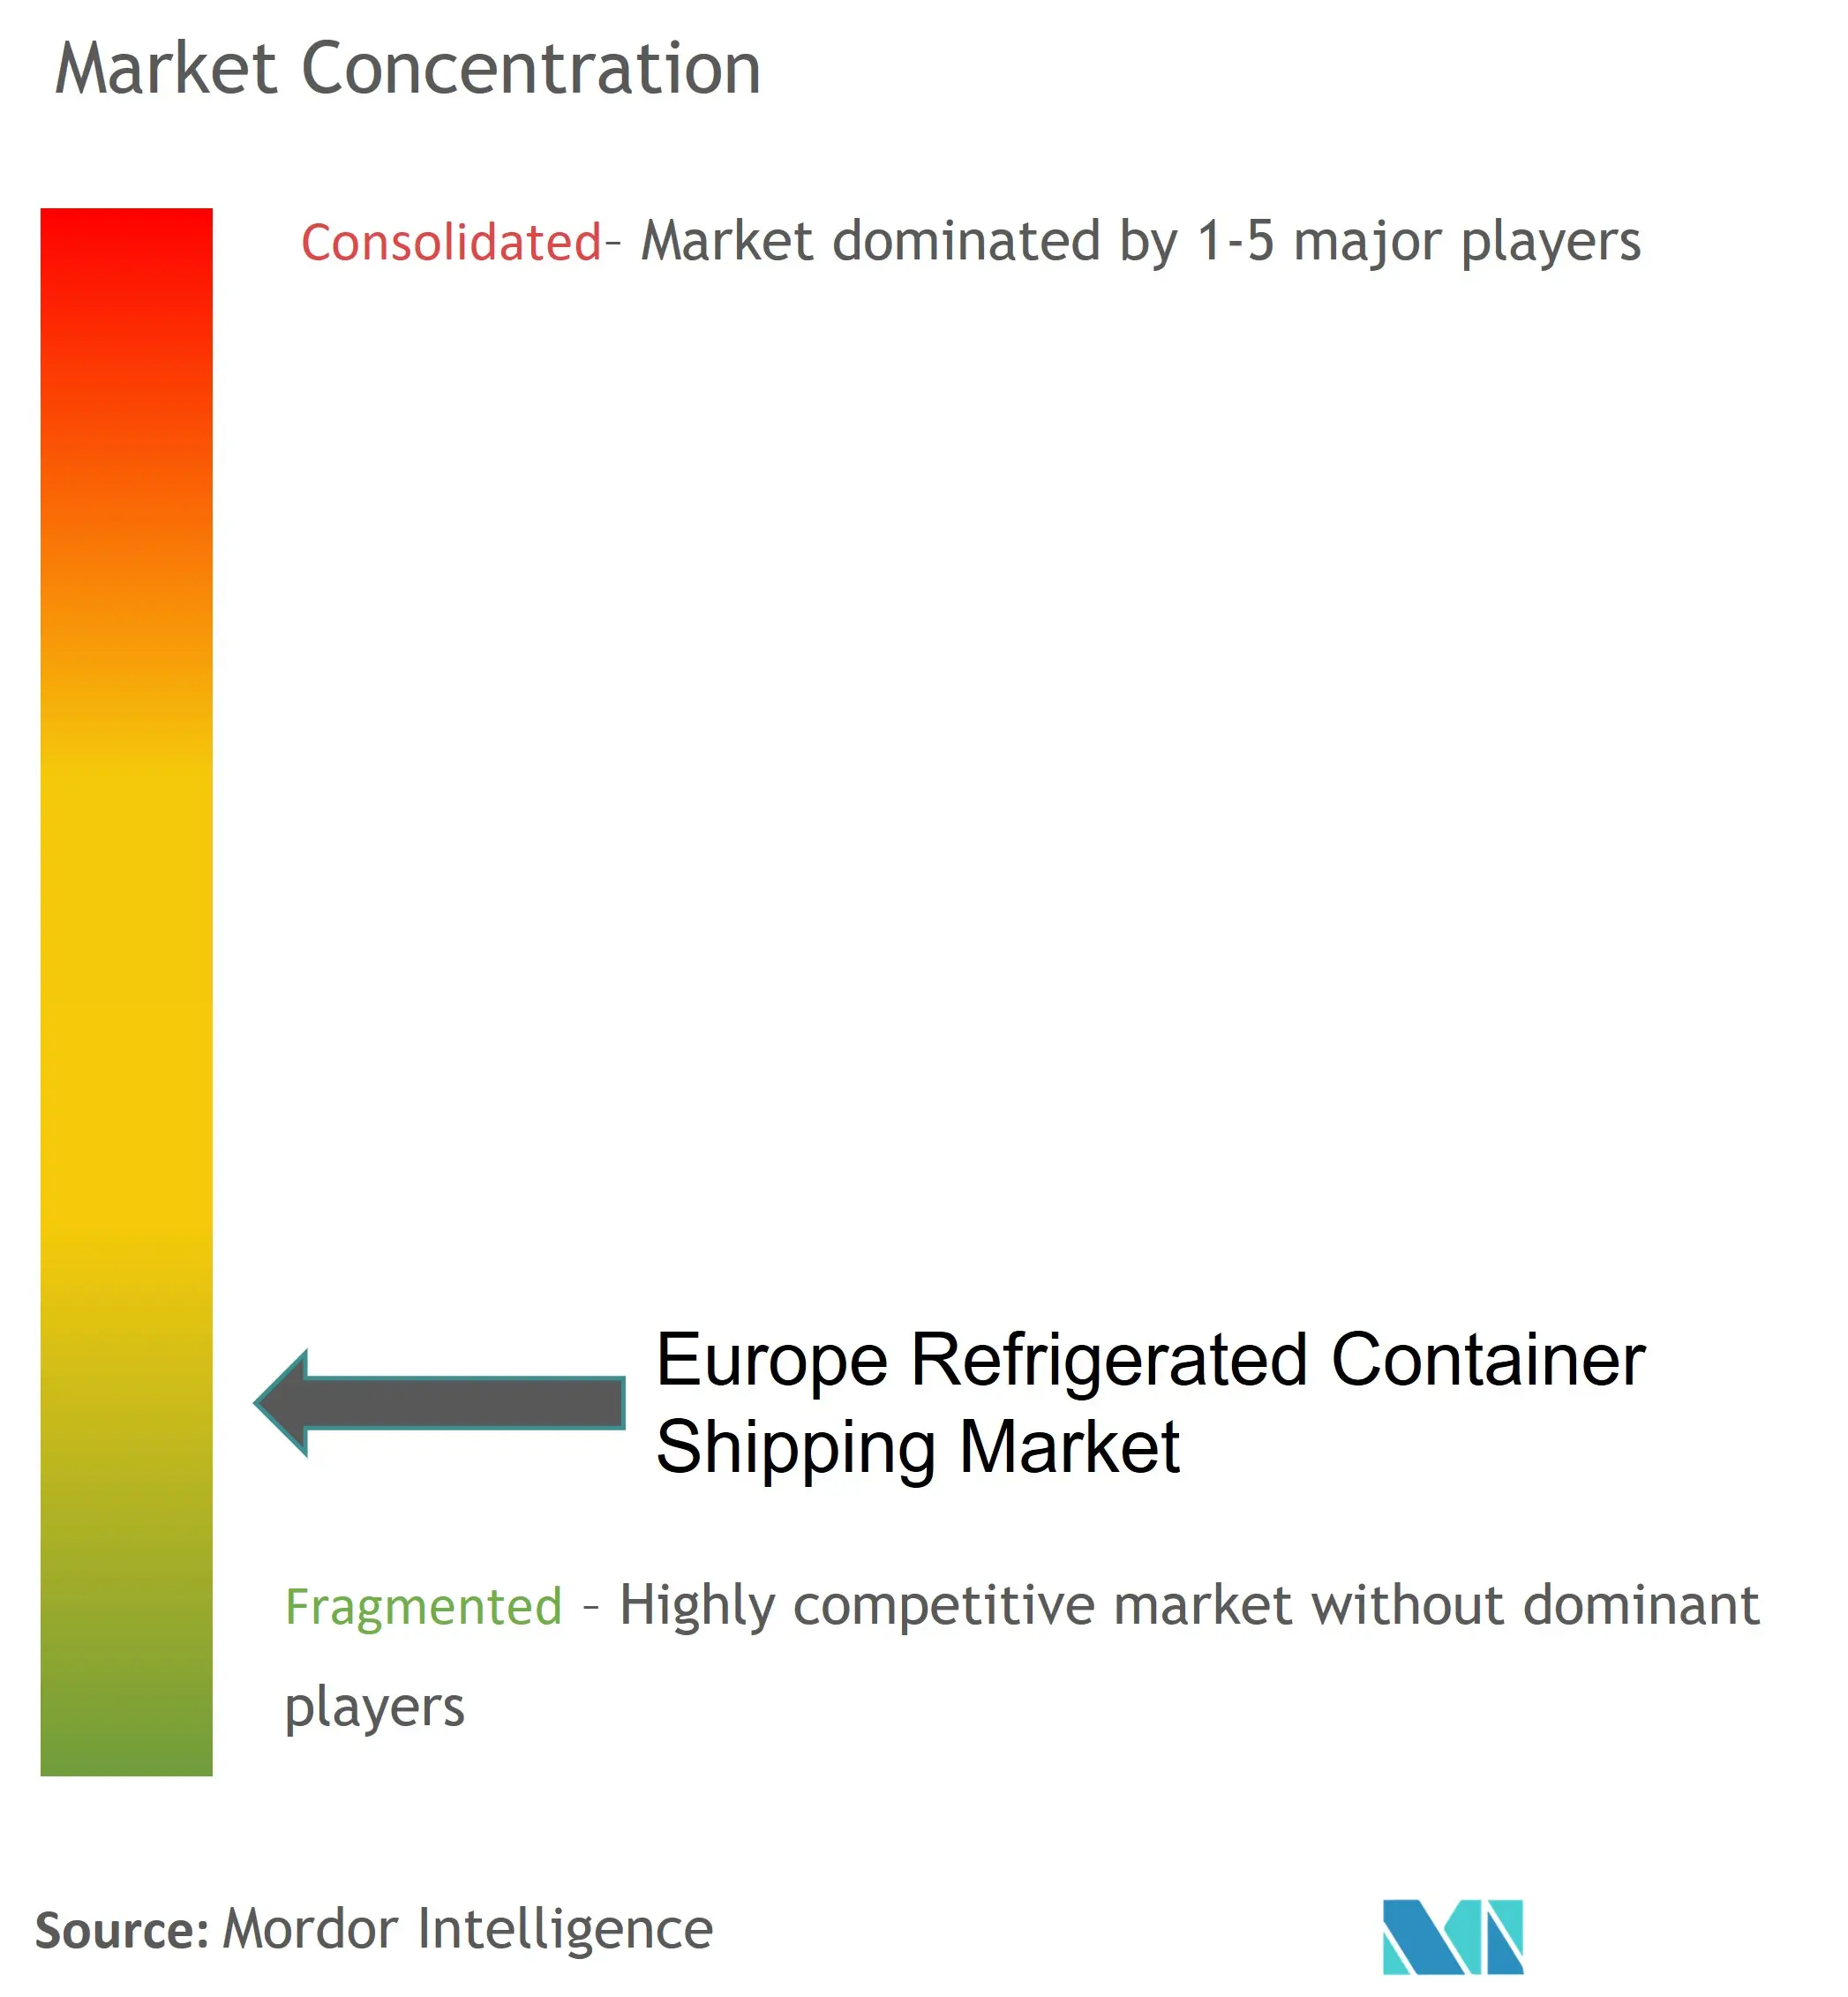 Europe Refrigerated Container Shipping Market Concentration